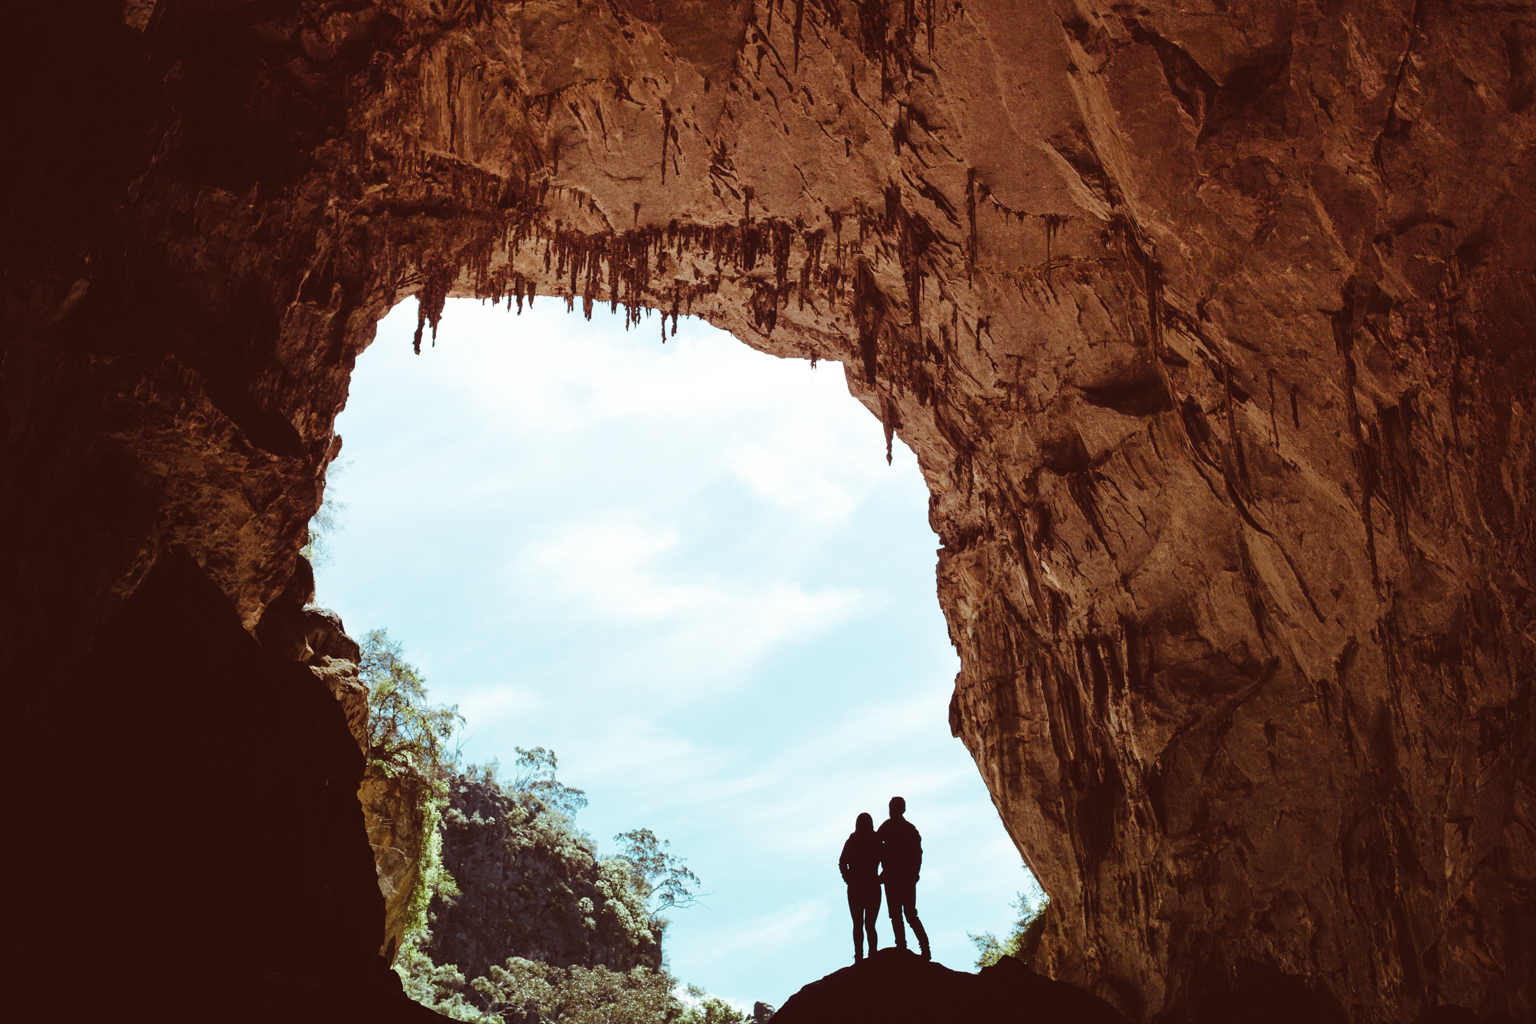 Silhouette of two people in a cave of Jenolan Karst Conservation Area. Photo: Tim Clark